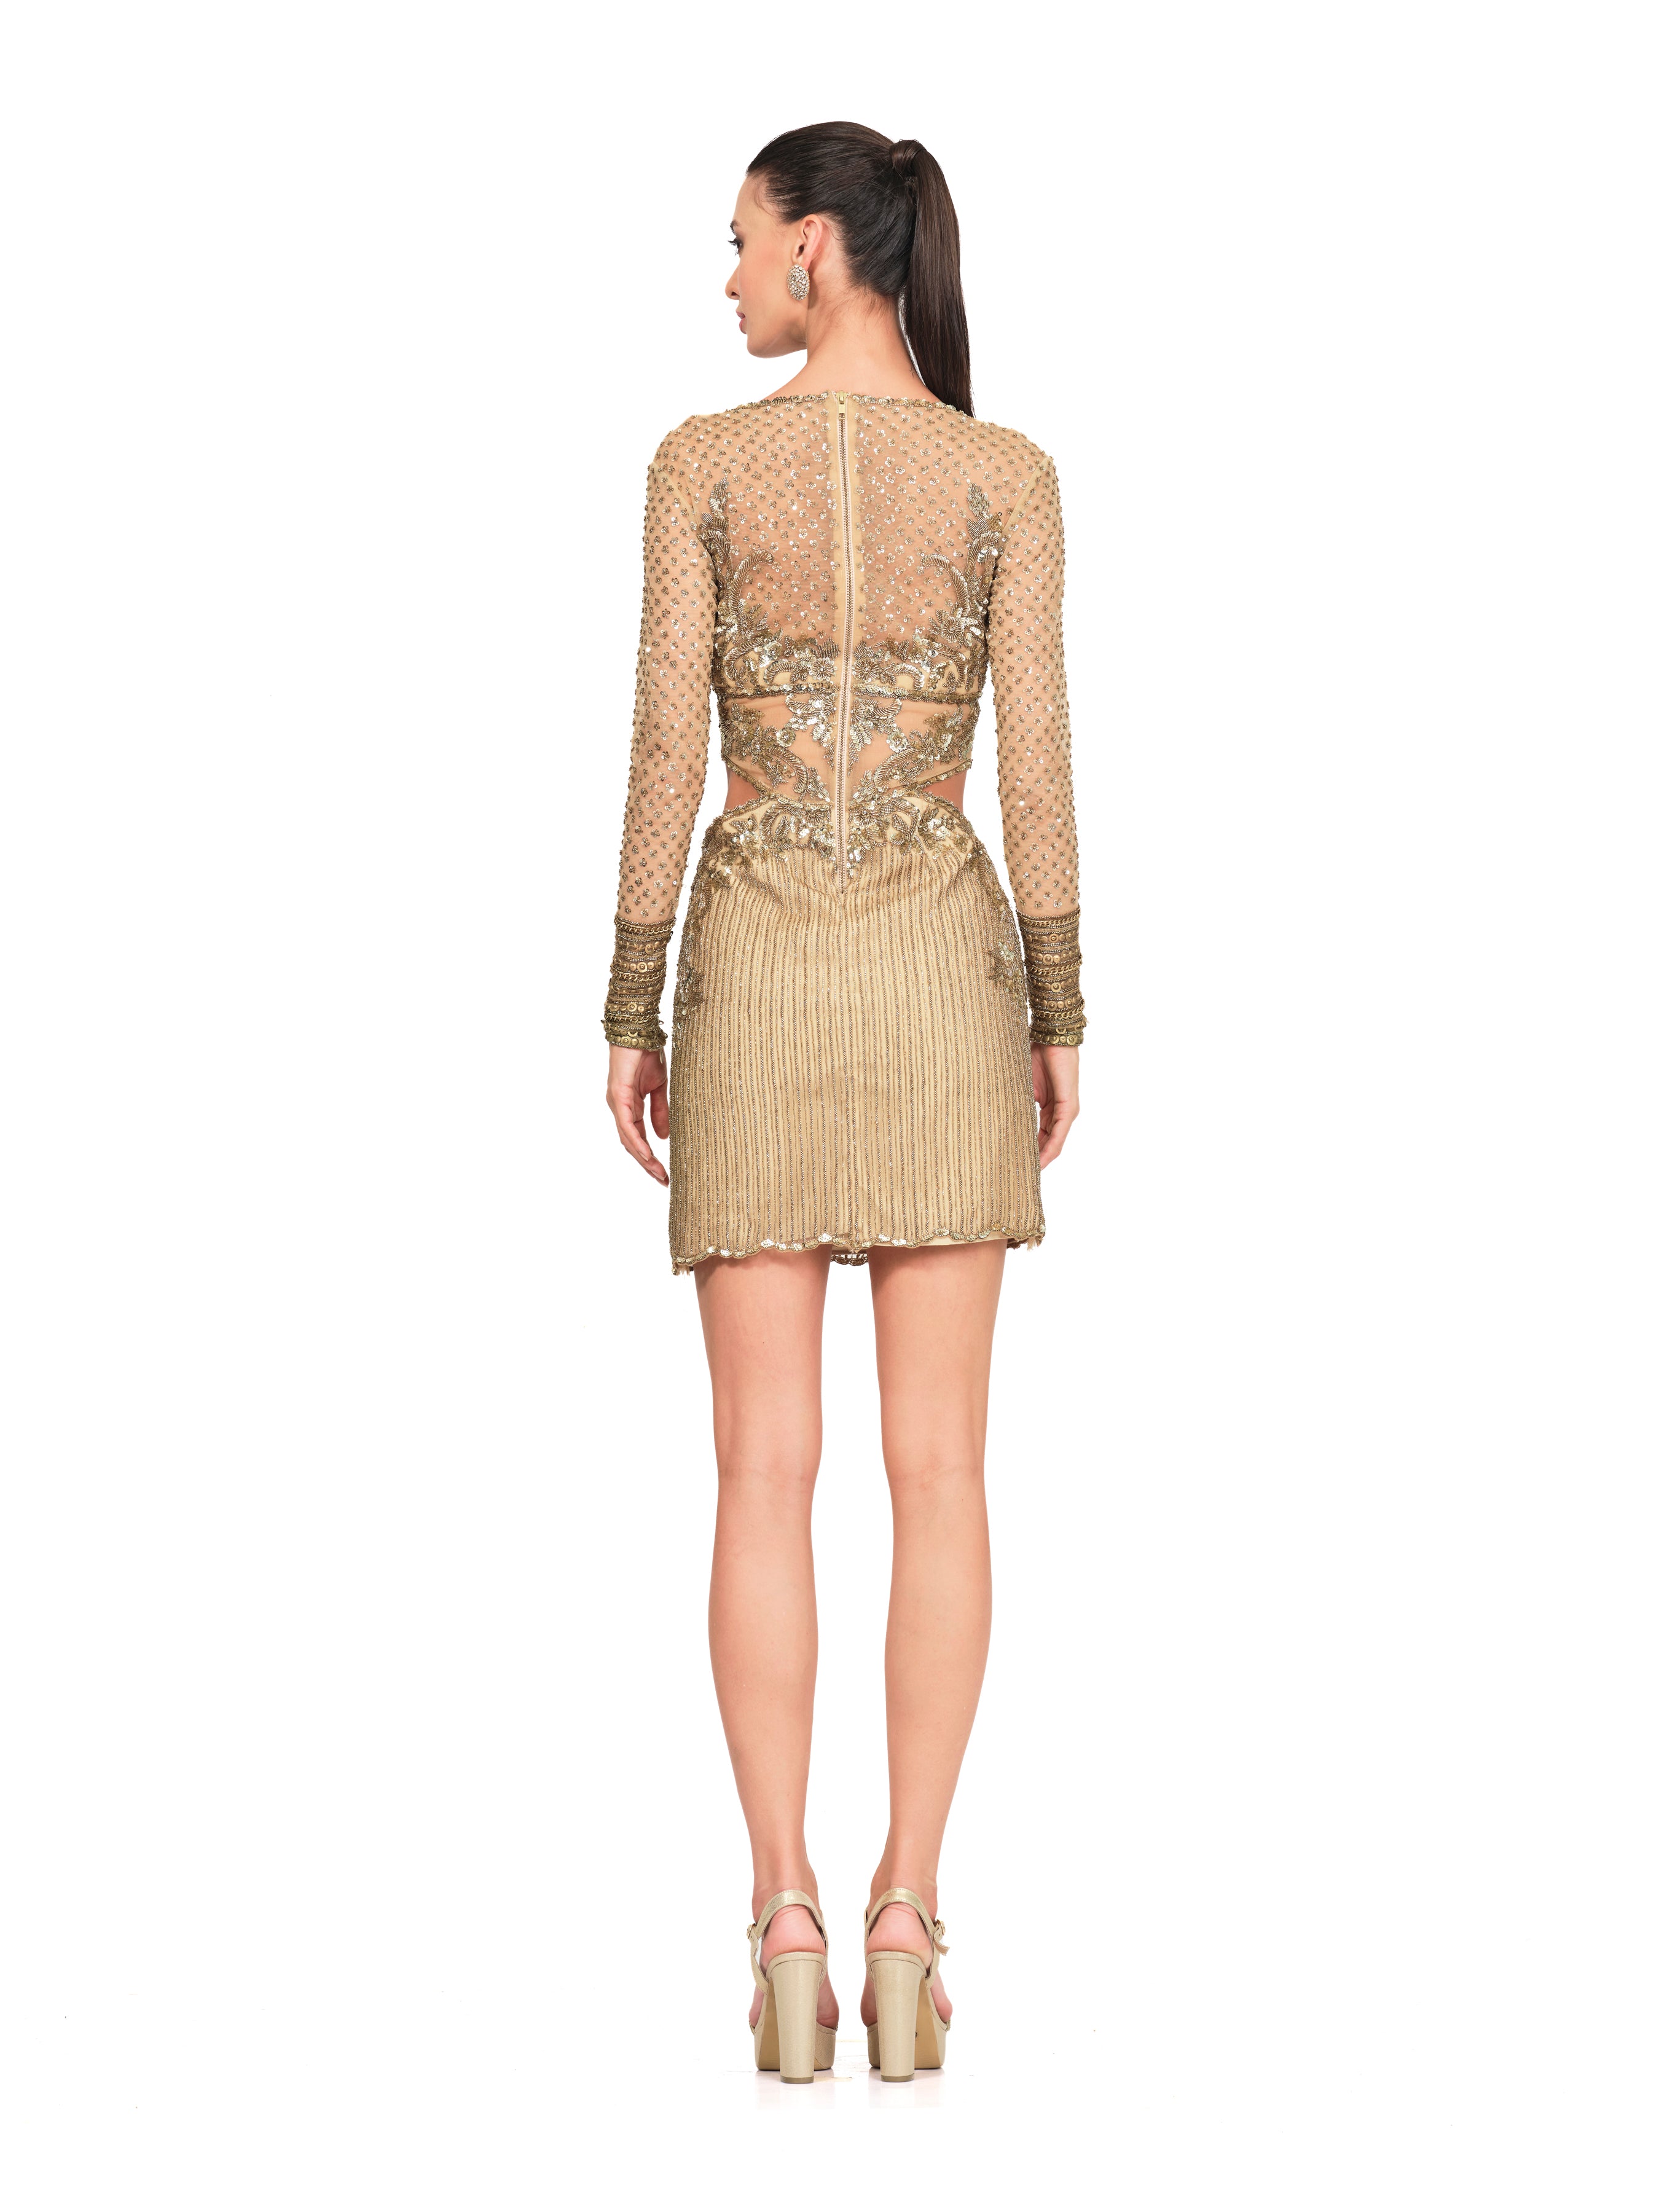 Gold Dress With Detailed Embroidery